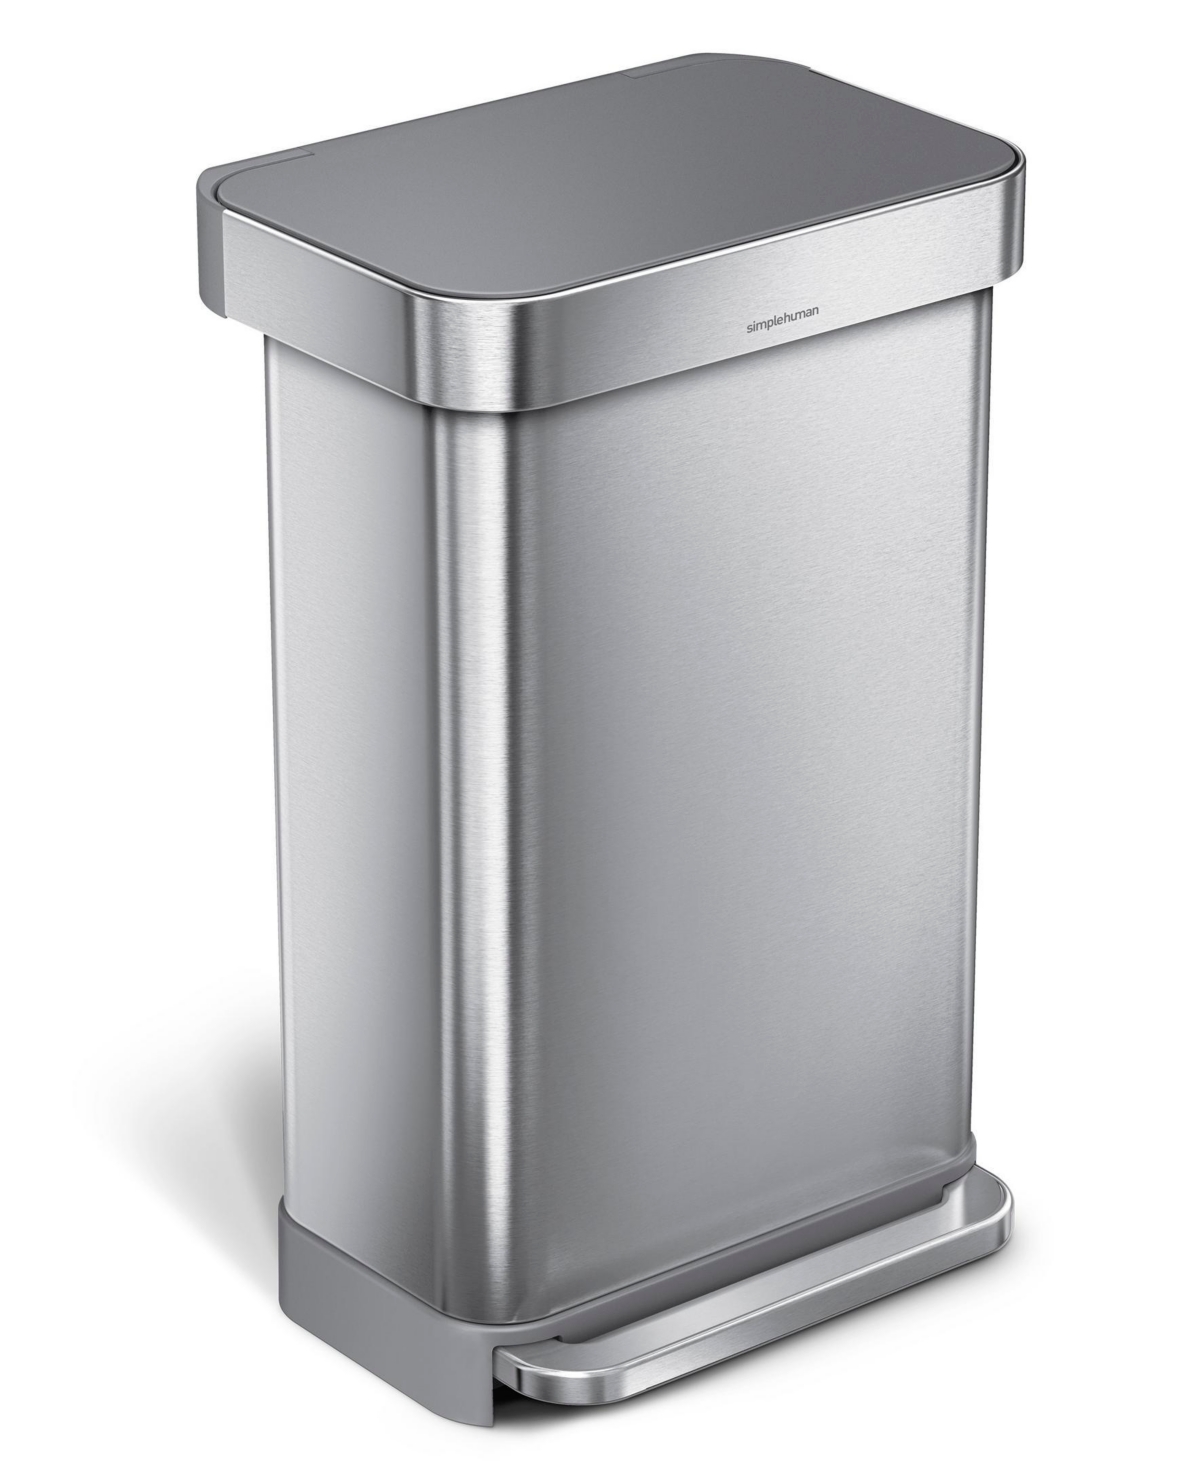 Simplehuman 45 Litre Rectangular Step Can With Liner Pocket With Plastic Lid In Brushed Stainless Steel